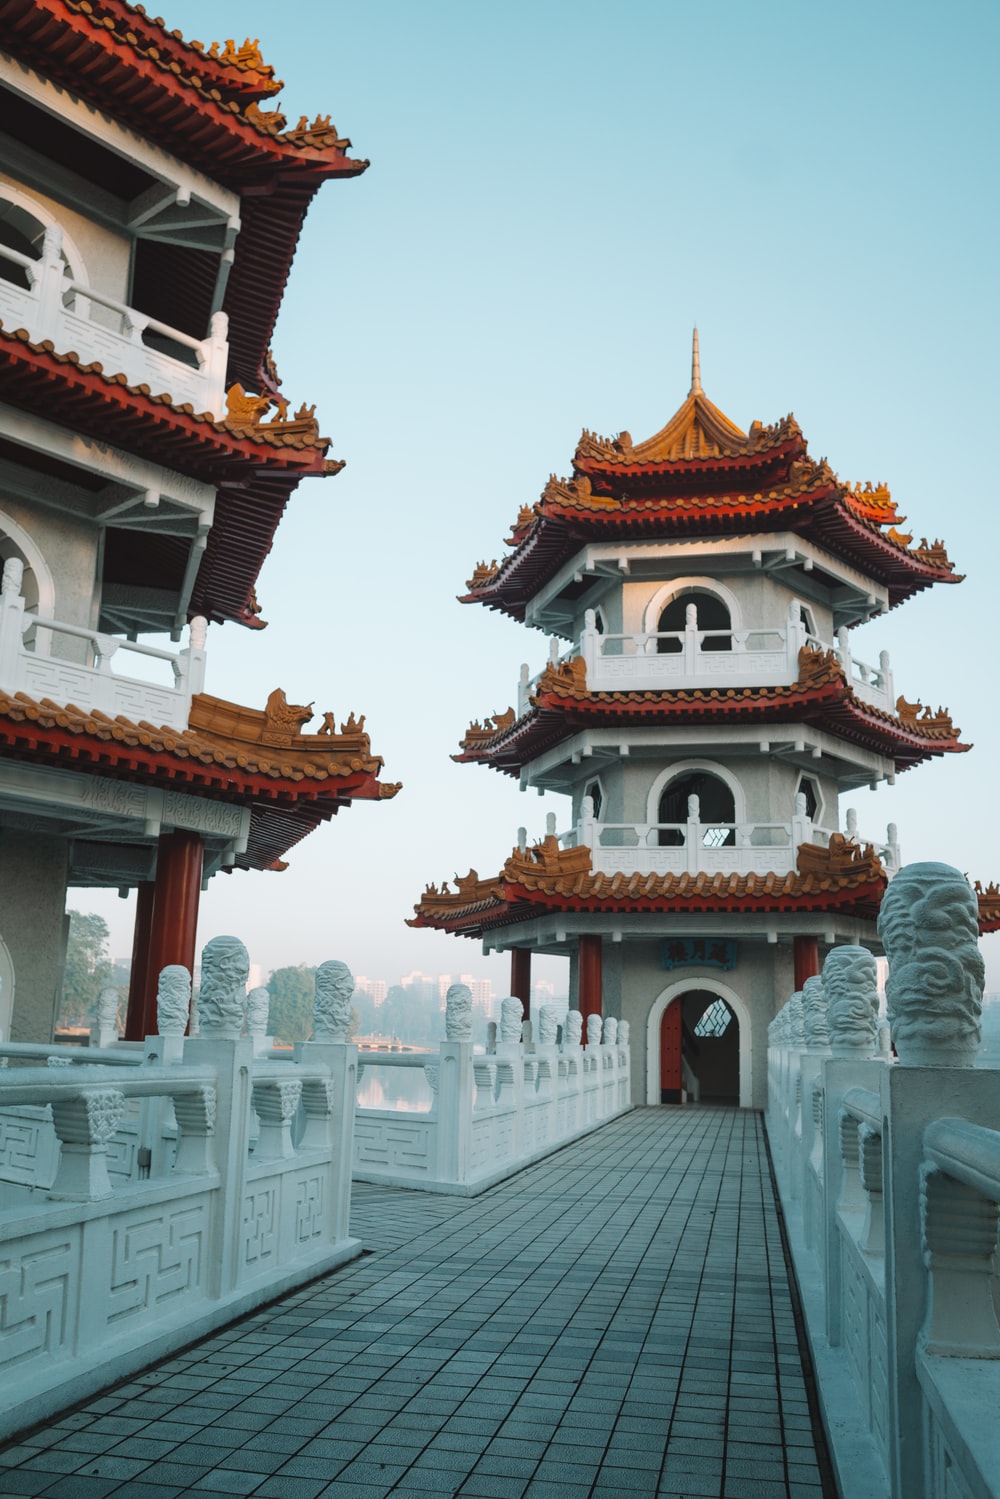 1K+ Chinese Temple Picture. Download Free Image